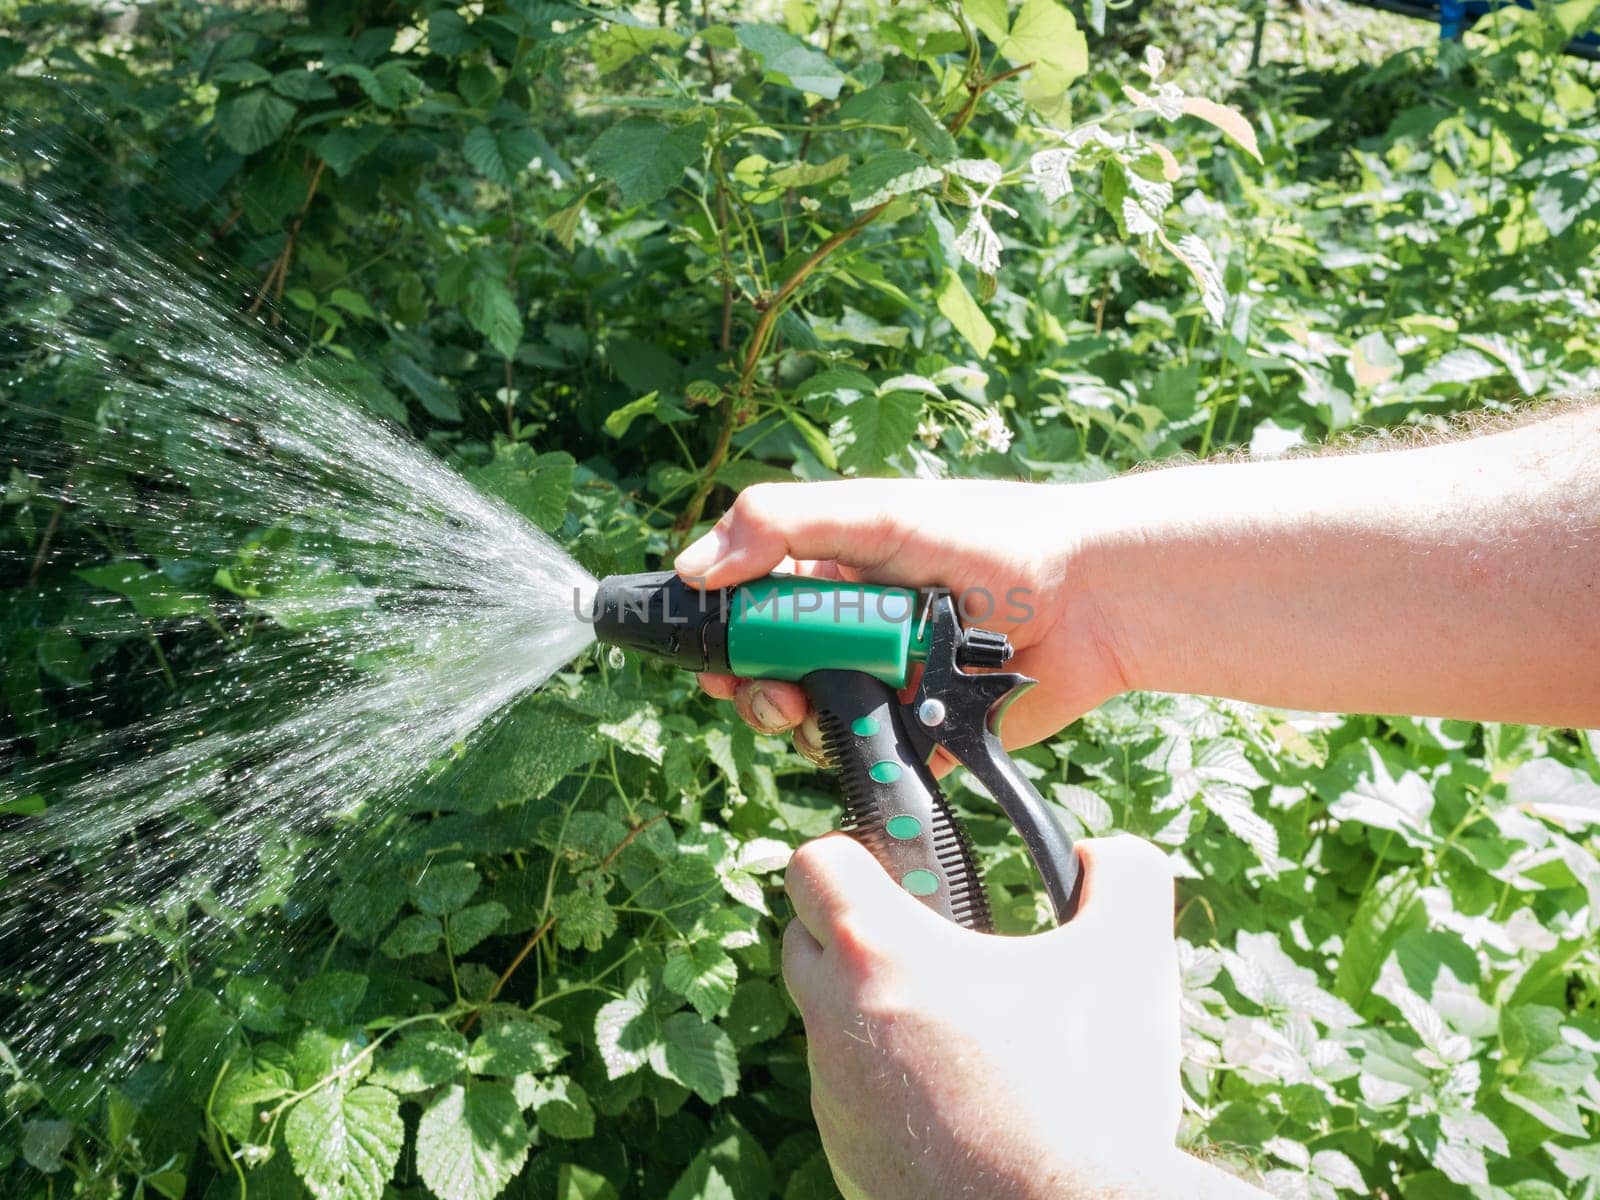 Hairy man's hands holding nozzle of watering hose and watering garden